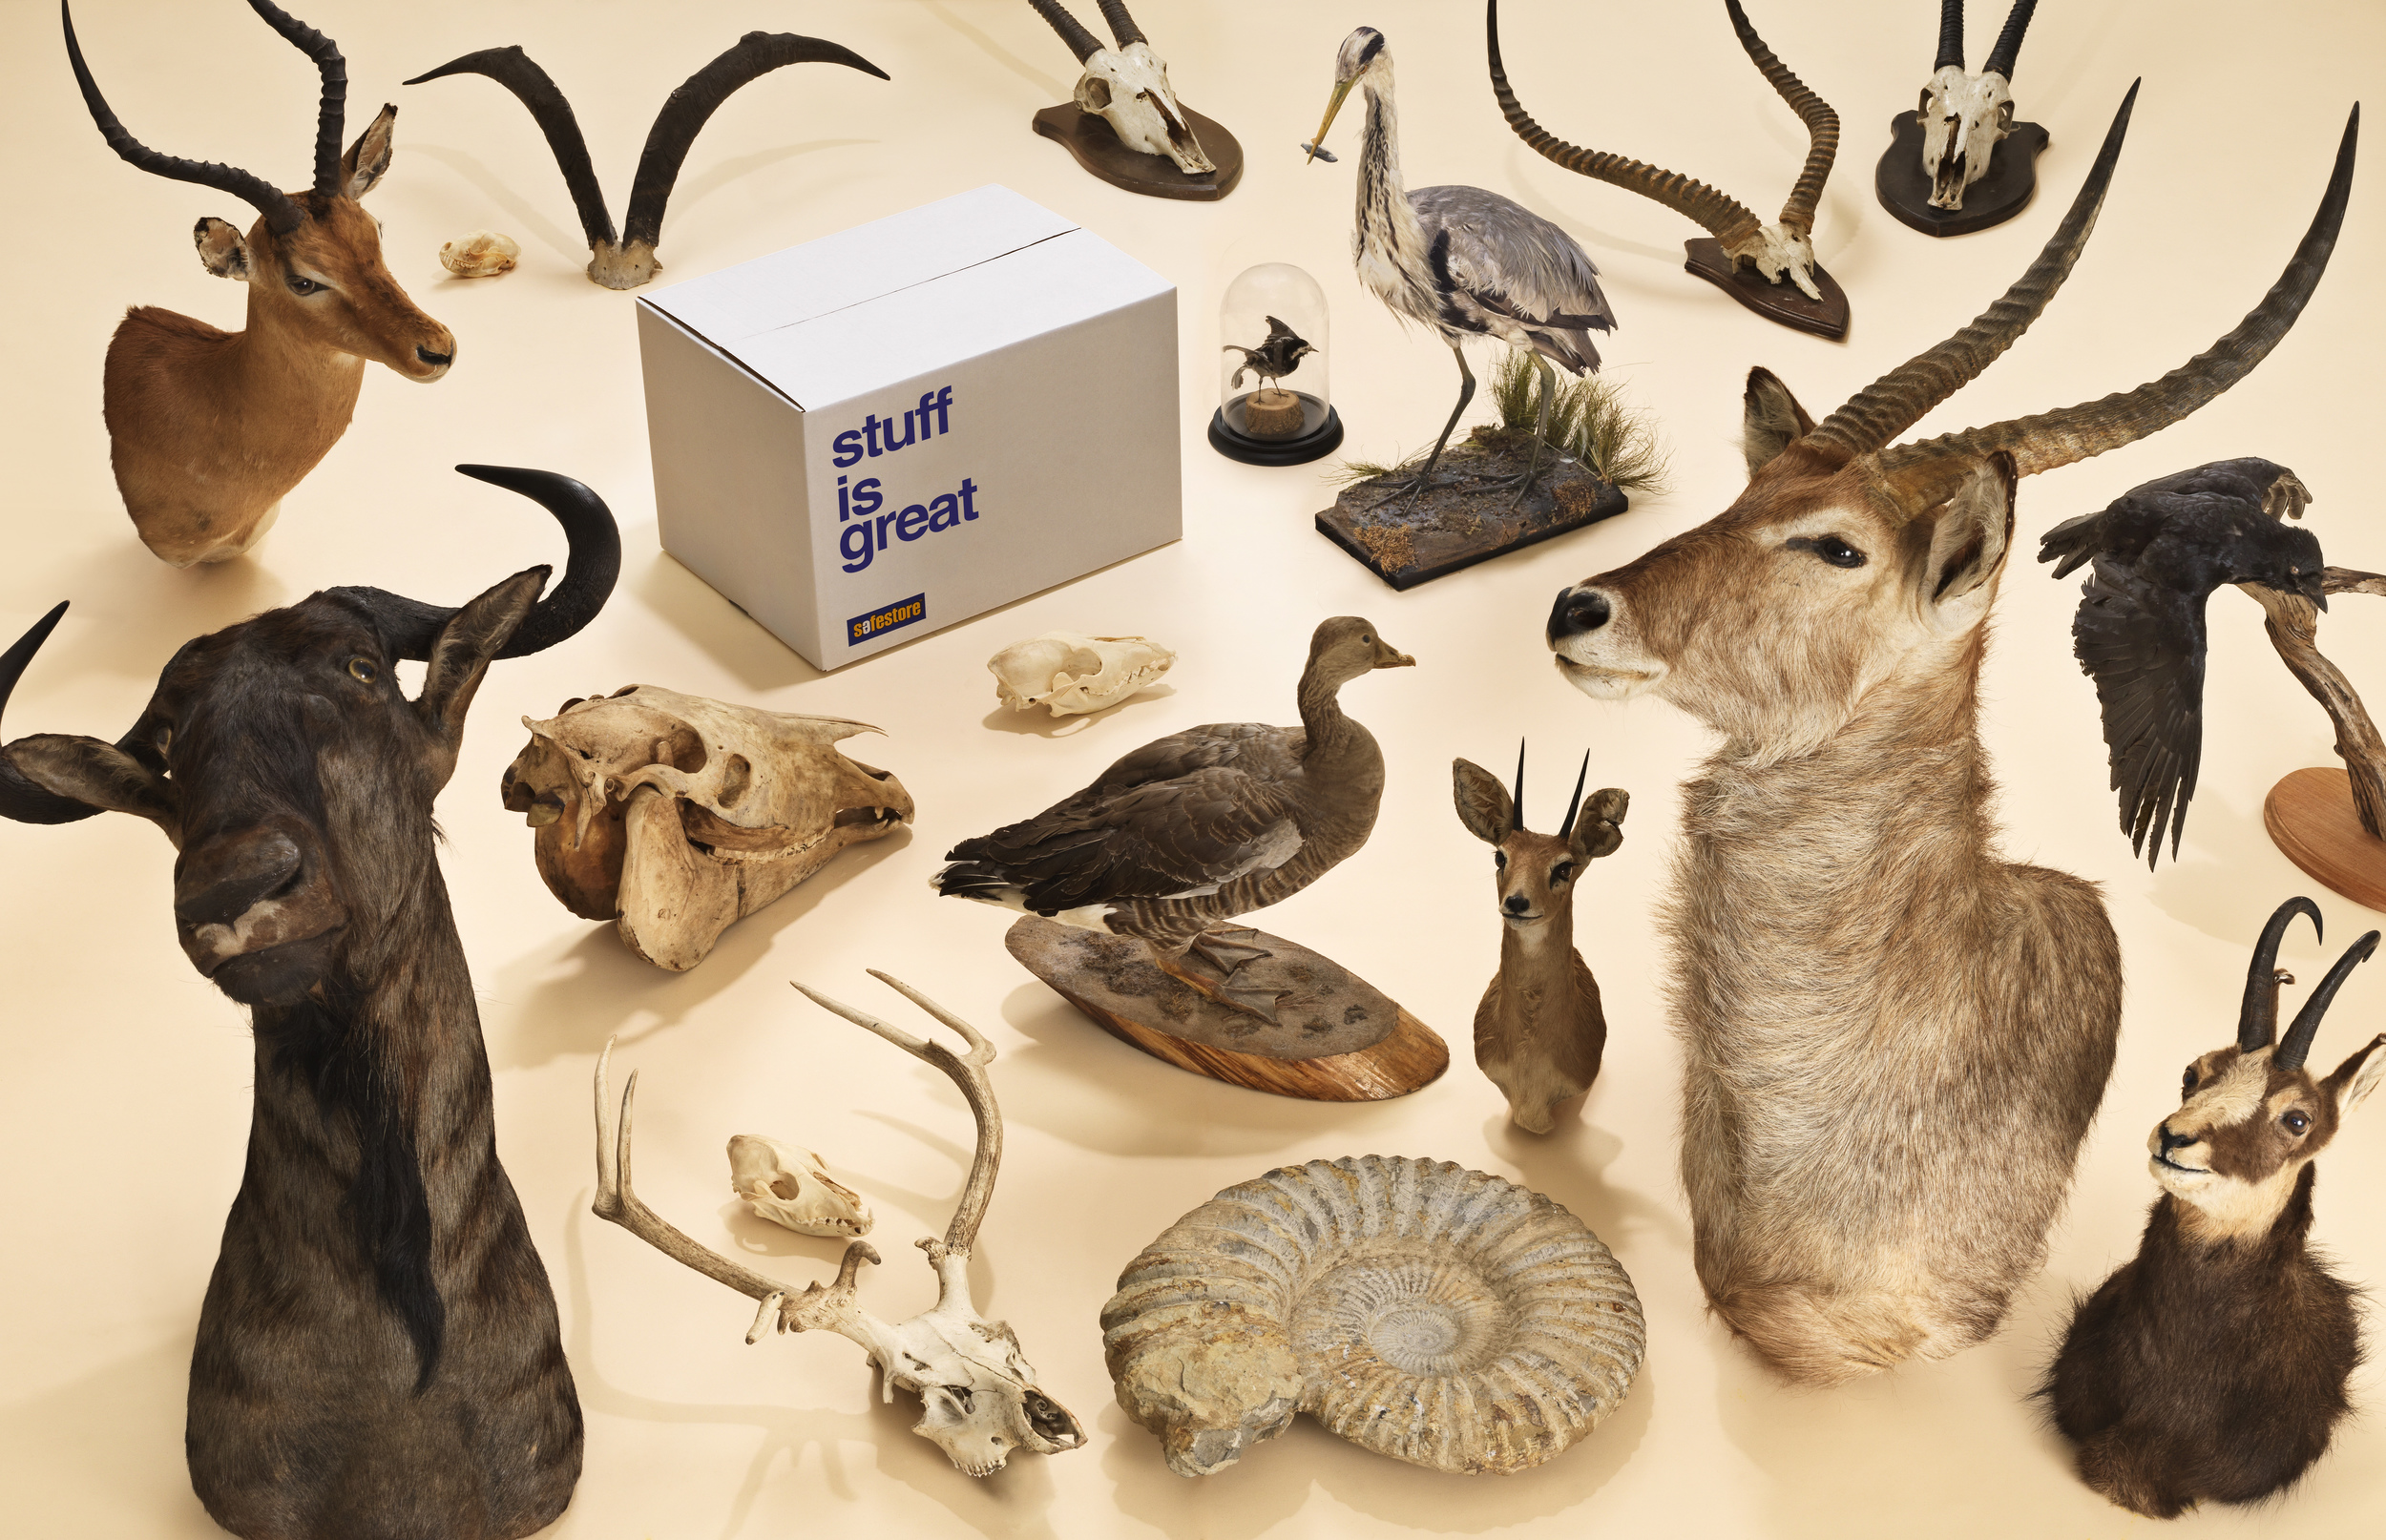 So whether you are a fan of taxidermy or not